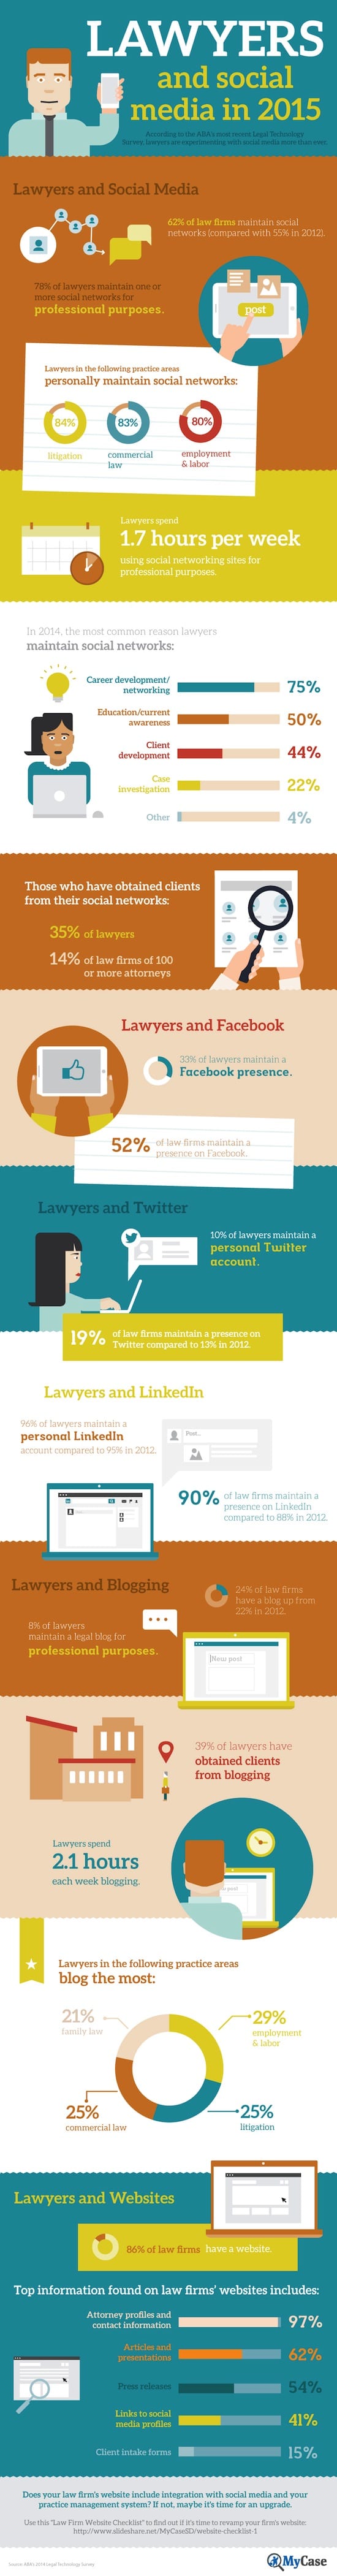 Social Media Facts For Attorneys in 2015 - Infographic